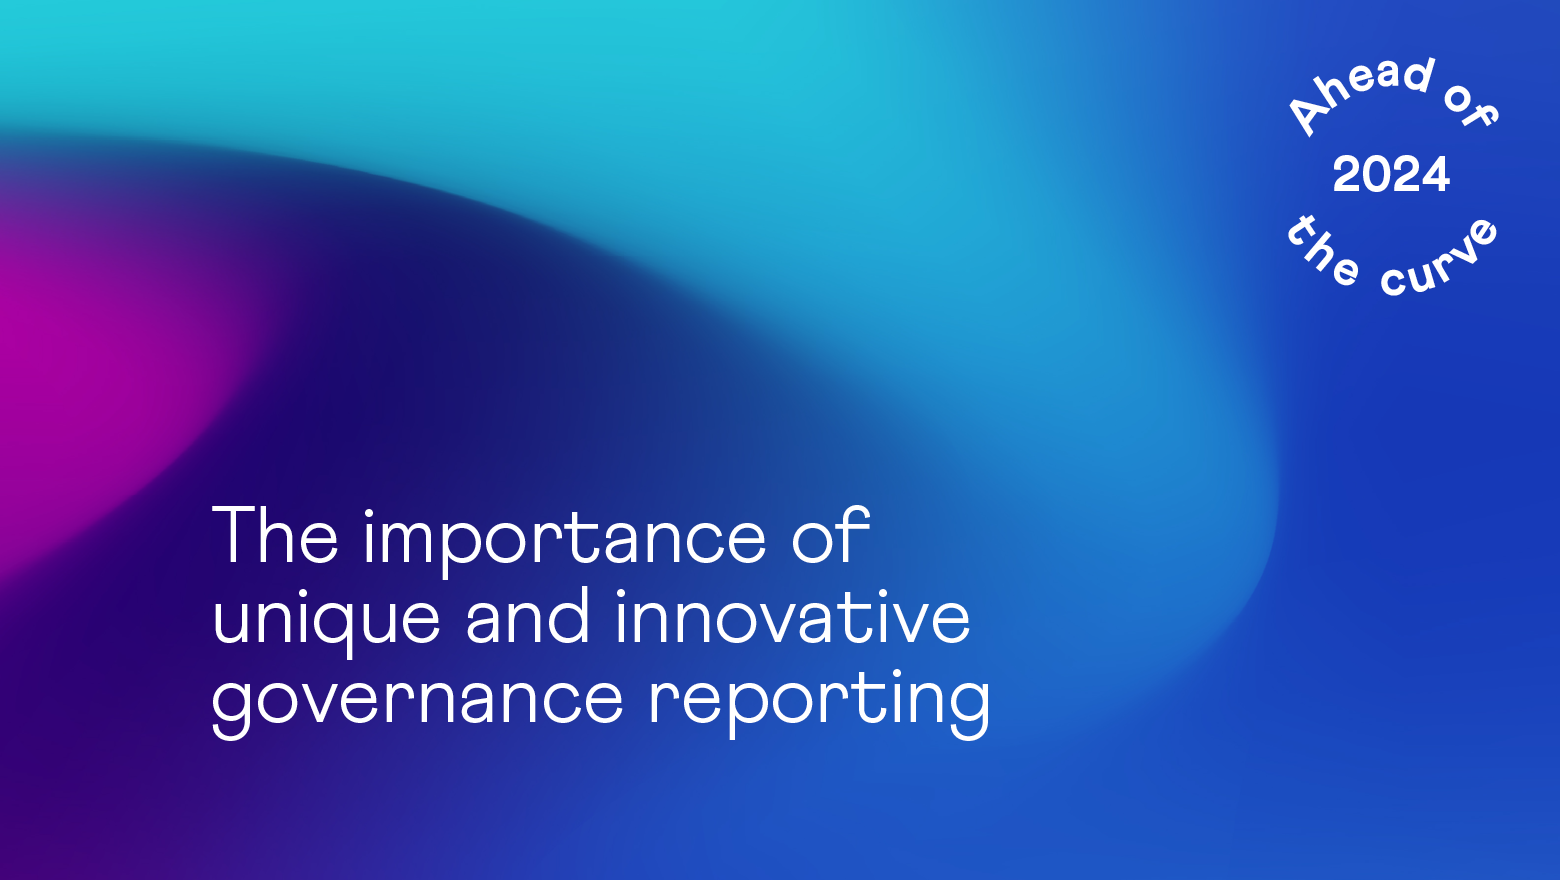 The importance of unique and innovative governance reporting